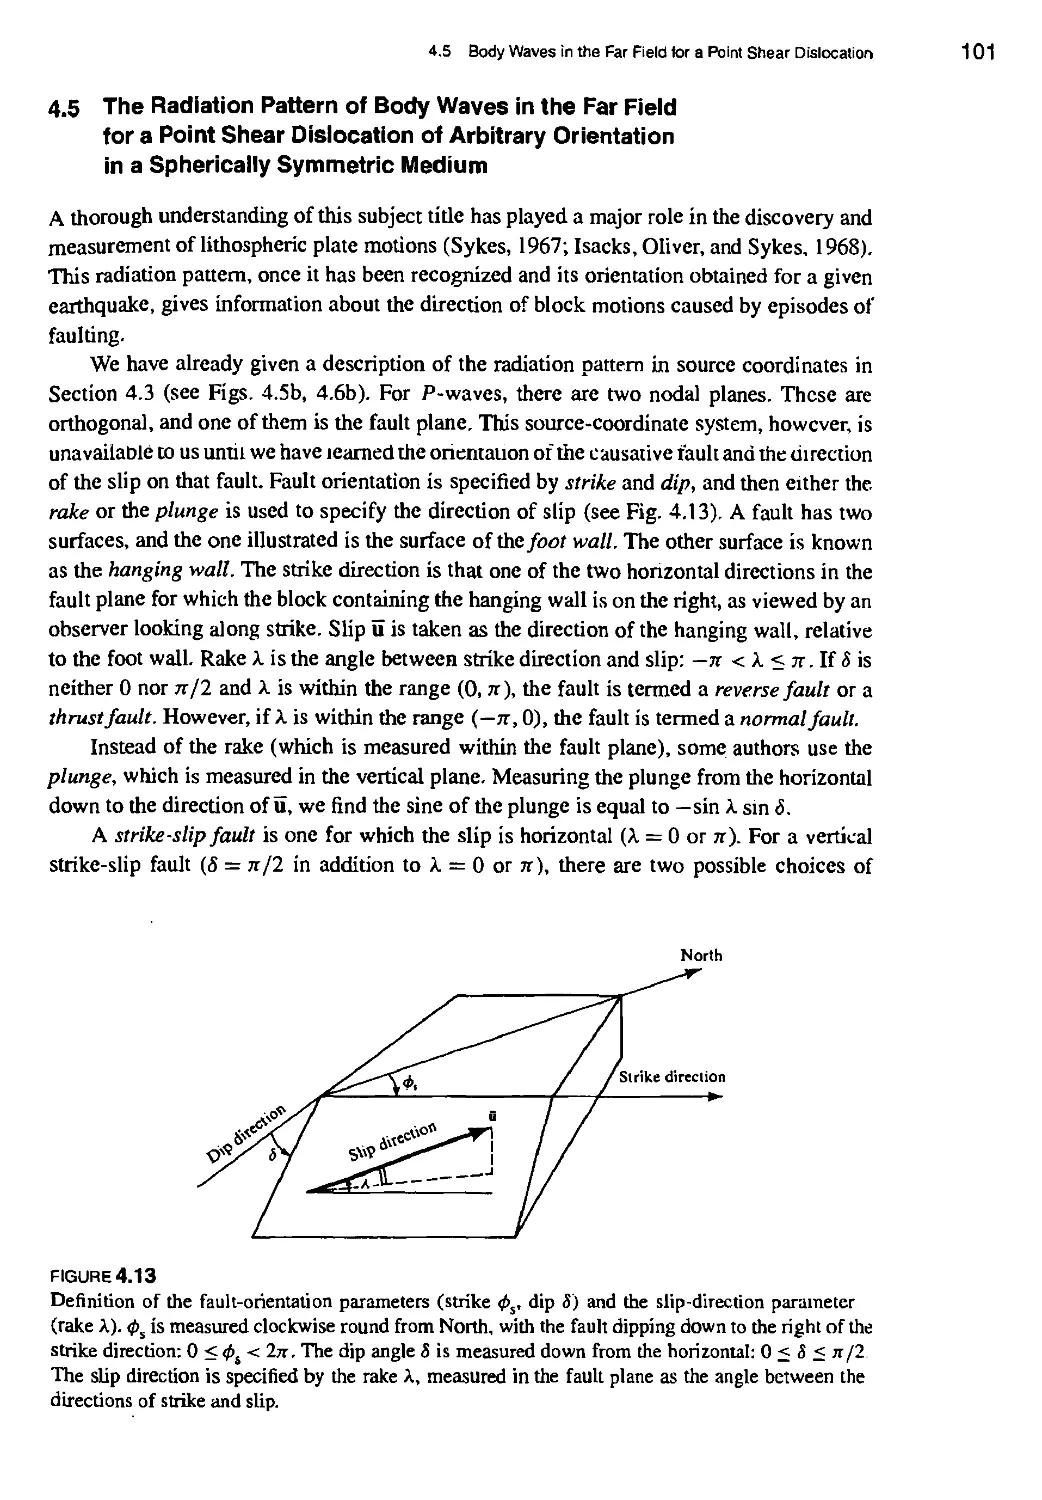 4.5 The Radiation Pattern of Body Waves in the Far Field for a Point Shear Dislocation of Arbitrary Orientation in a Spherically Symmetric Medium